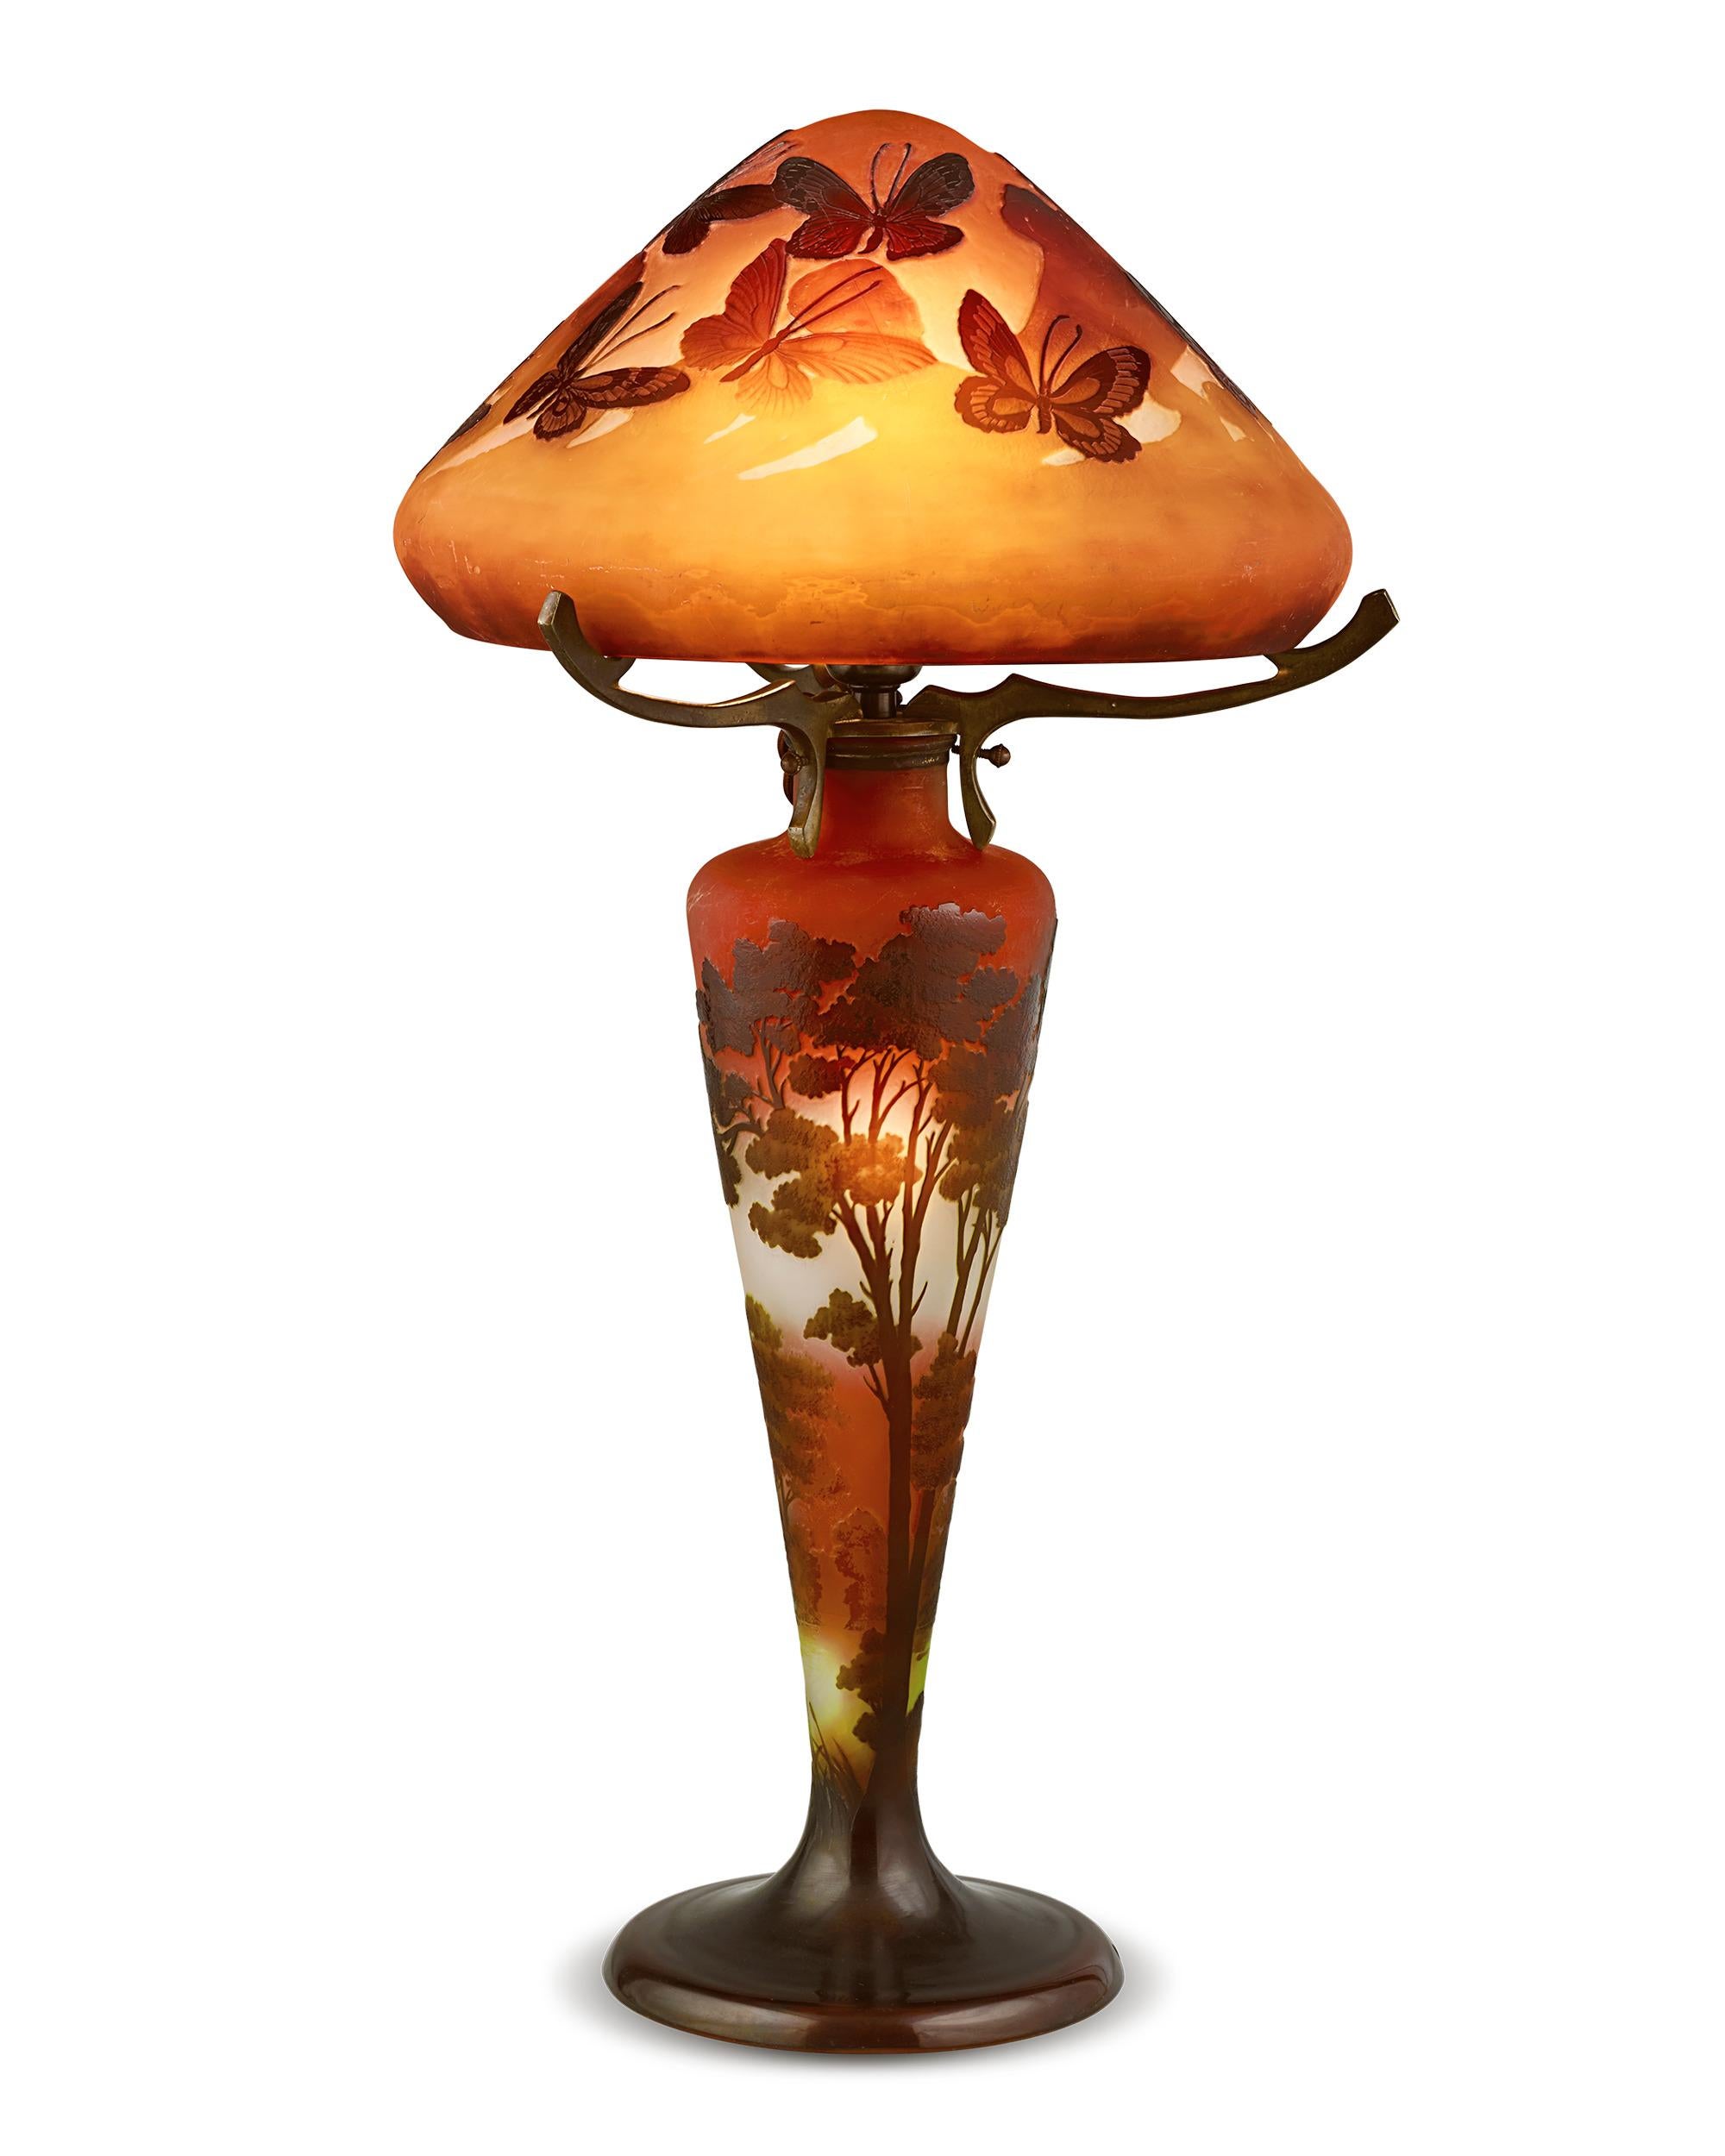 Impressive in both size and artistry, this magnificent lamp is the work of the famed Art Nouveau master Émile Gallé, one of the most highly regarded names in French glassmaking. The artist's appreciation of nature is evident in the detailed